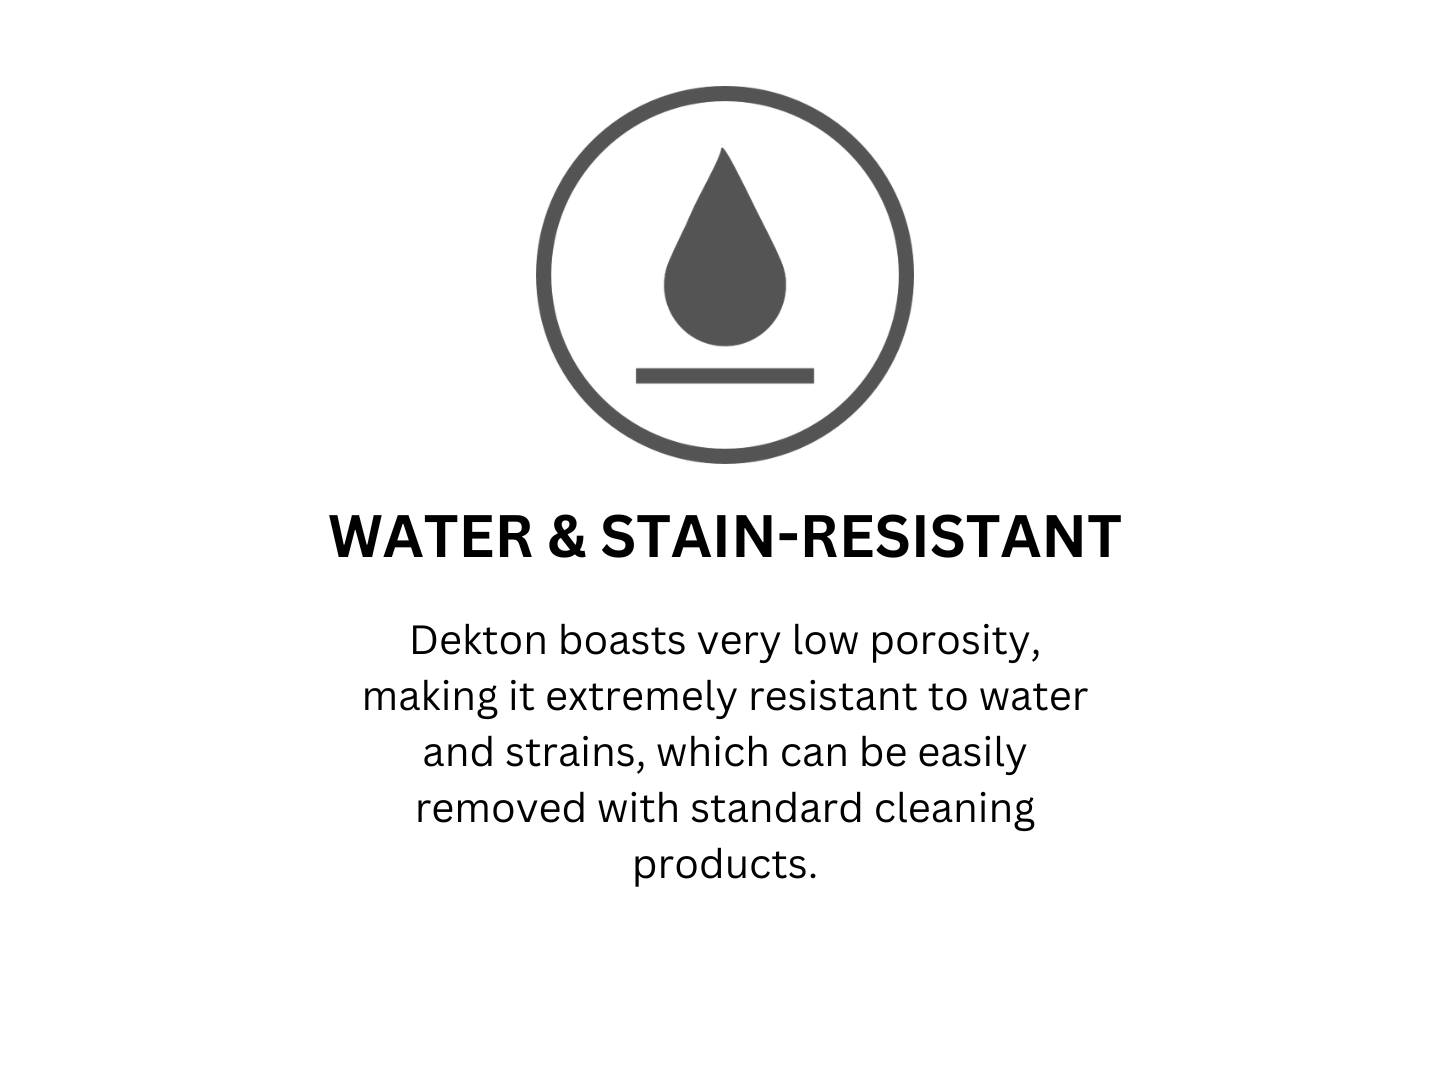 WATER & STAIN-RESISTANT